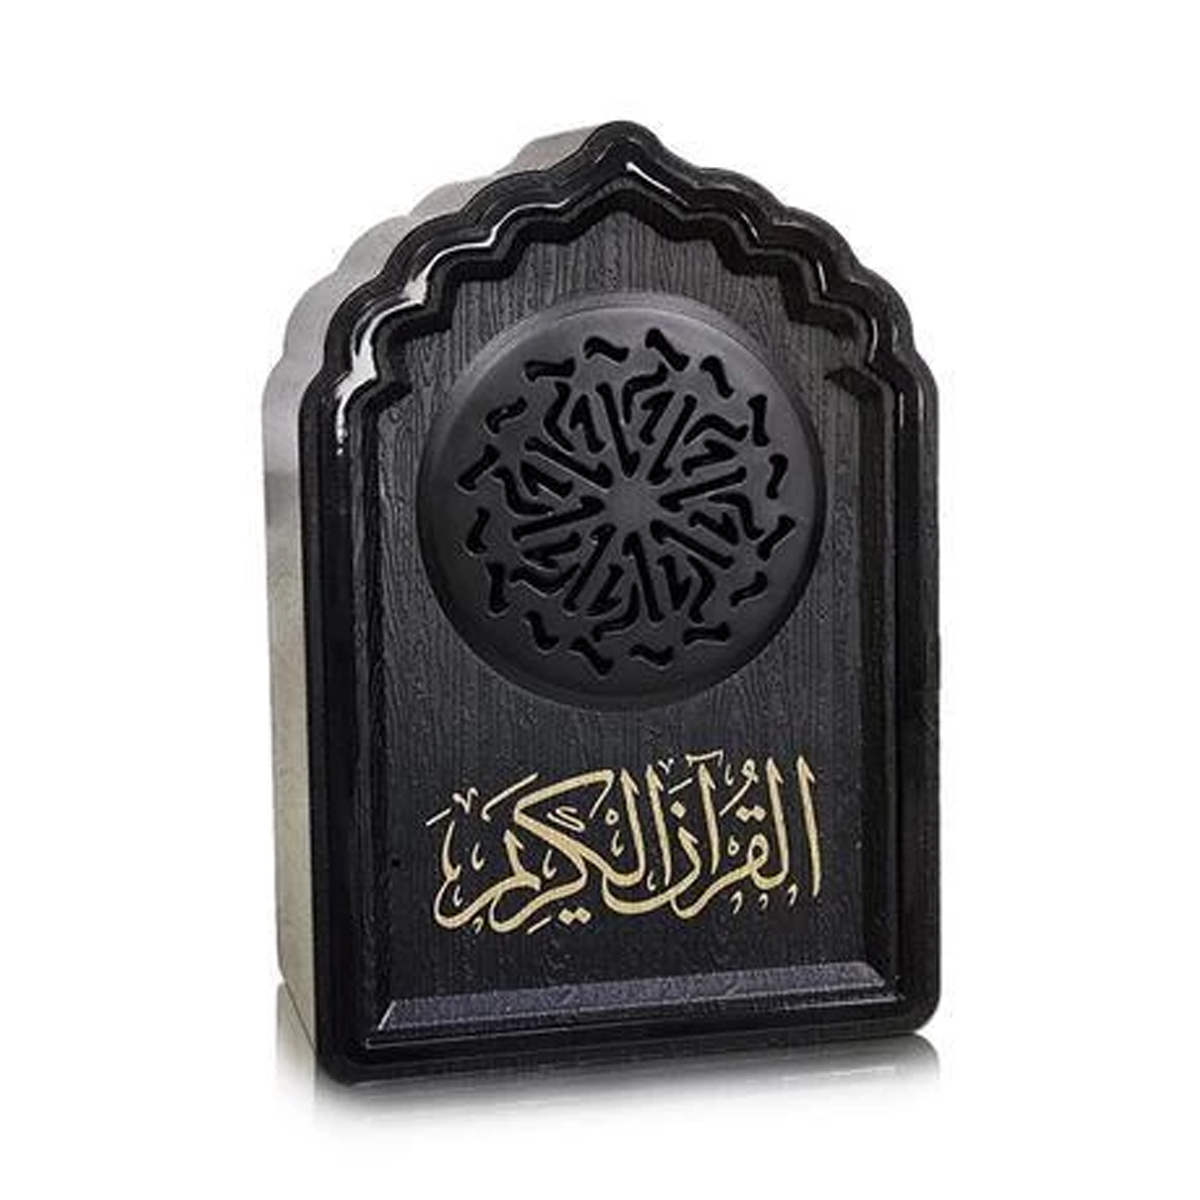 QB-818 Wireless Blue tooth Speaker Portable mosque shaped Quran speaker